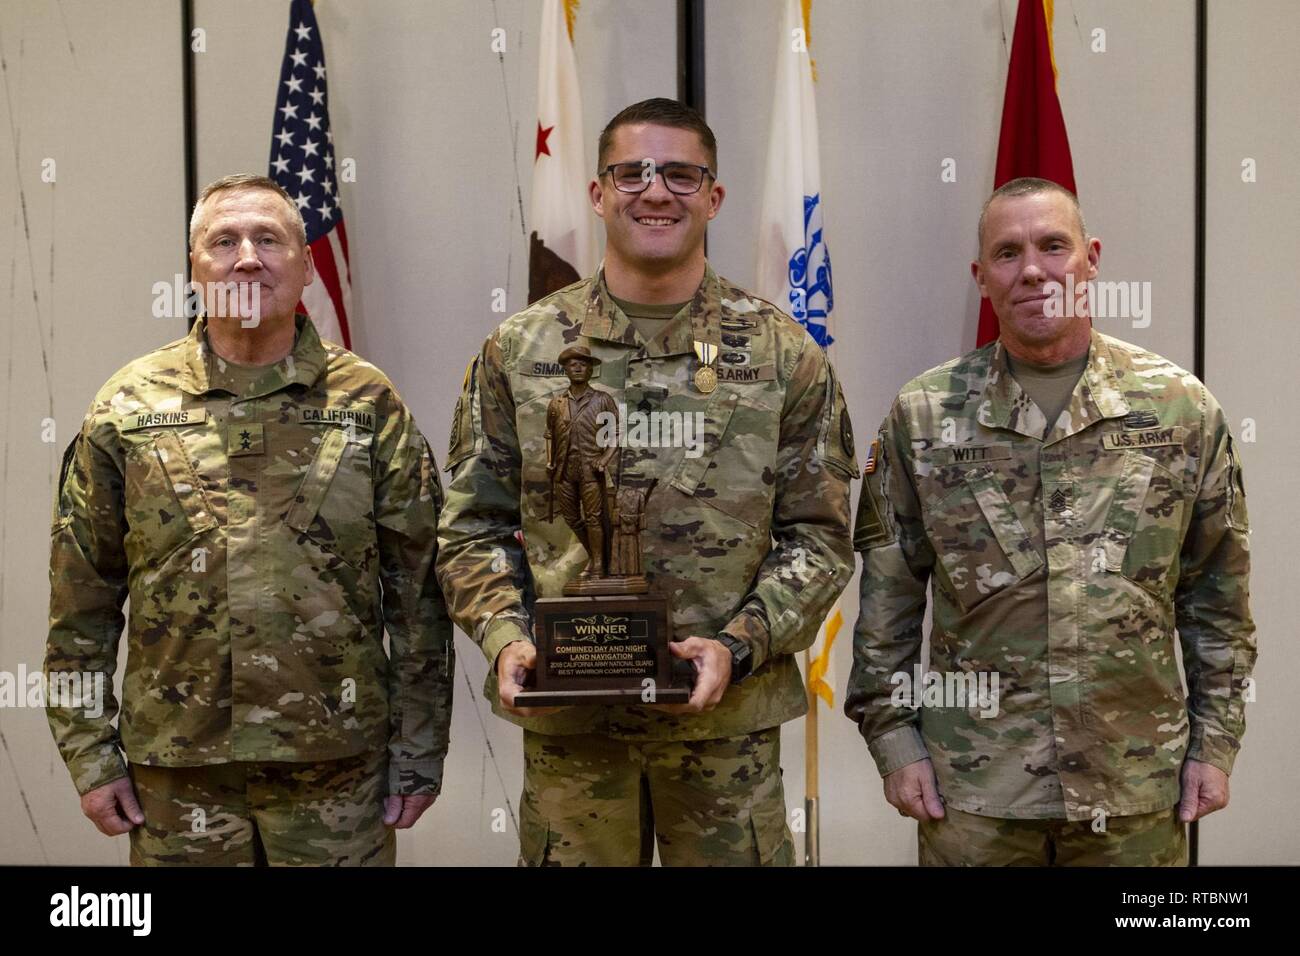 California State Military Reserve Maj. Gen. Lawrence Haskins, commander of the California Army National Guard, left, and U.S. Army Command Sgt. Maj. Scott Witt, the senior enlisted soldier in the California Army National Guard, right, present one of three trophies to Staff Sgt. Kory Simmons, of the California National Guard's 95th Civil Support Team, during the Best Warrior Luncheon, Feb. 9, 2019, in Anaheim, California. Simmons earned top honors in state's Best Warrior Competition for his performance in the unknown distance ruck march, combined day and night land navigation course, and pistol Stock Photo